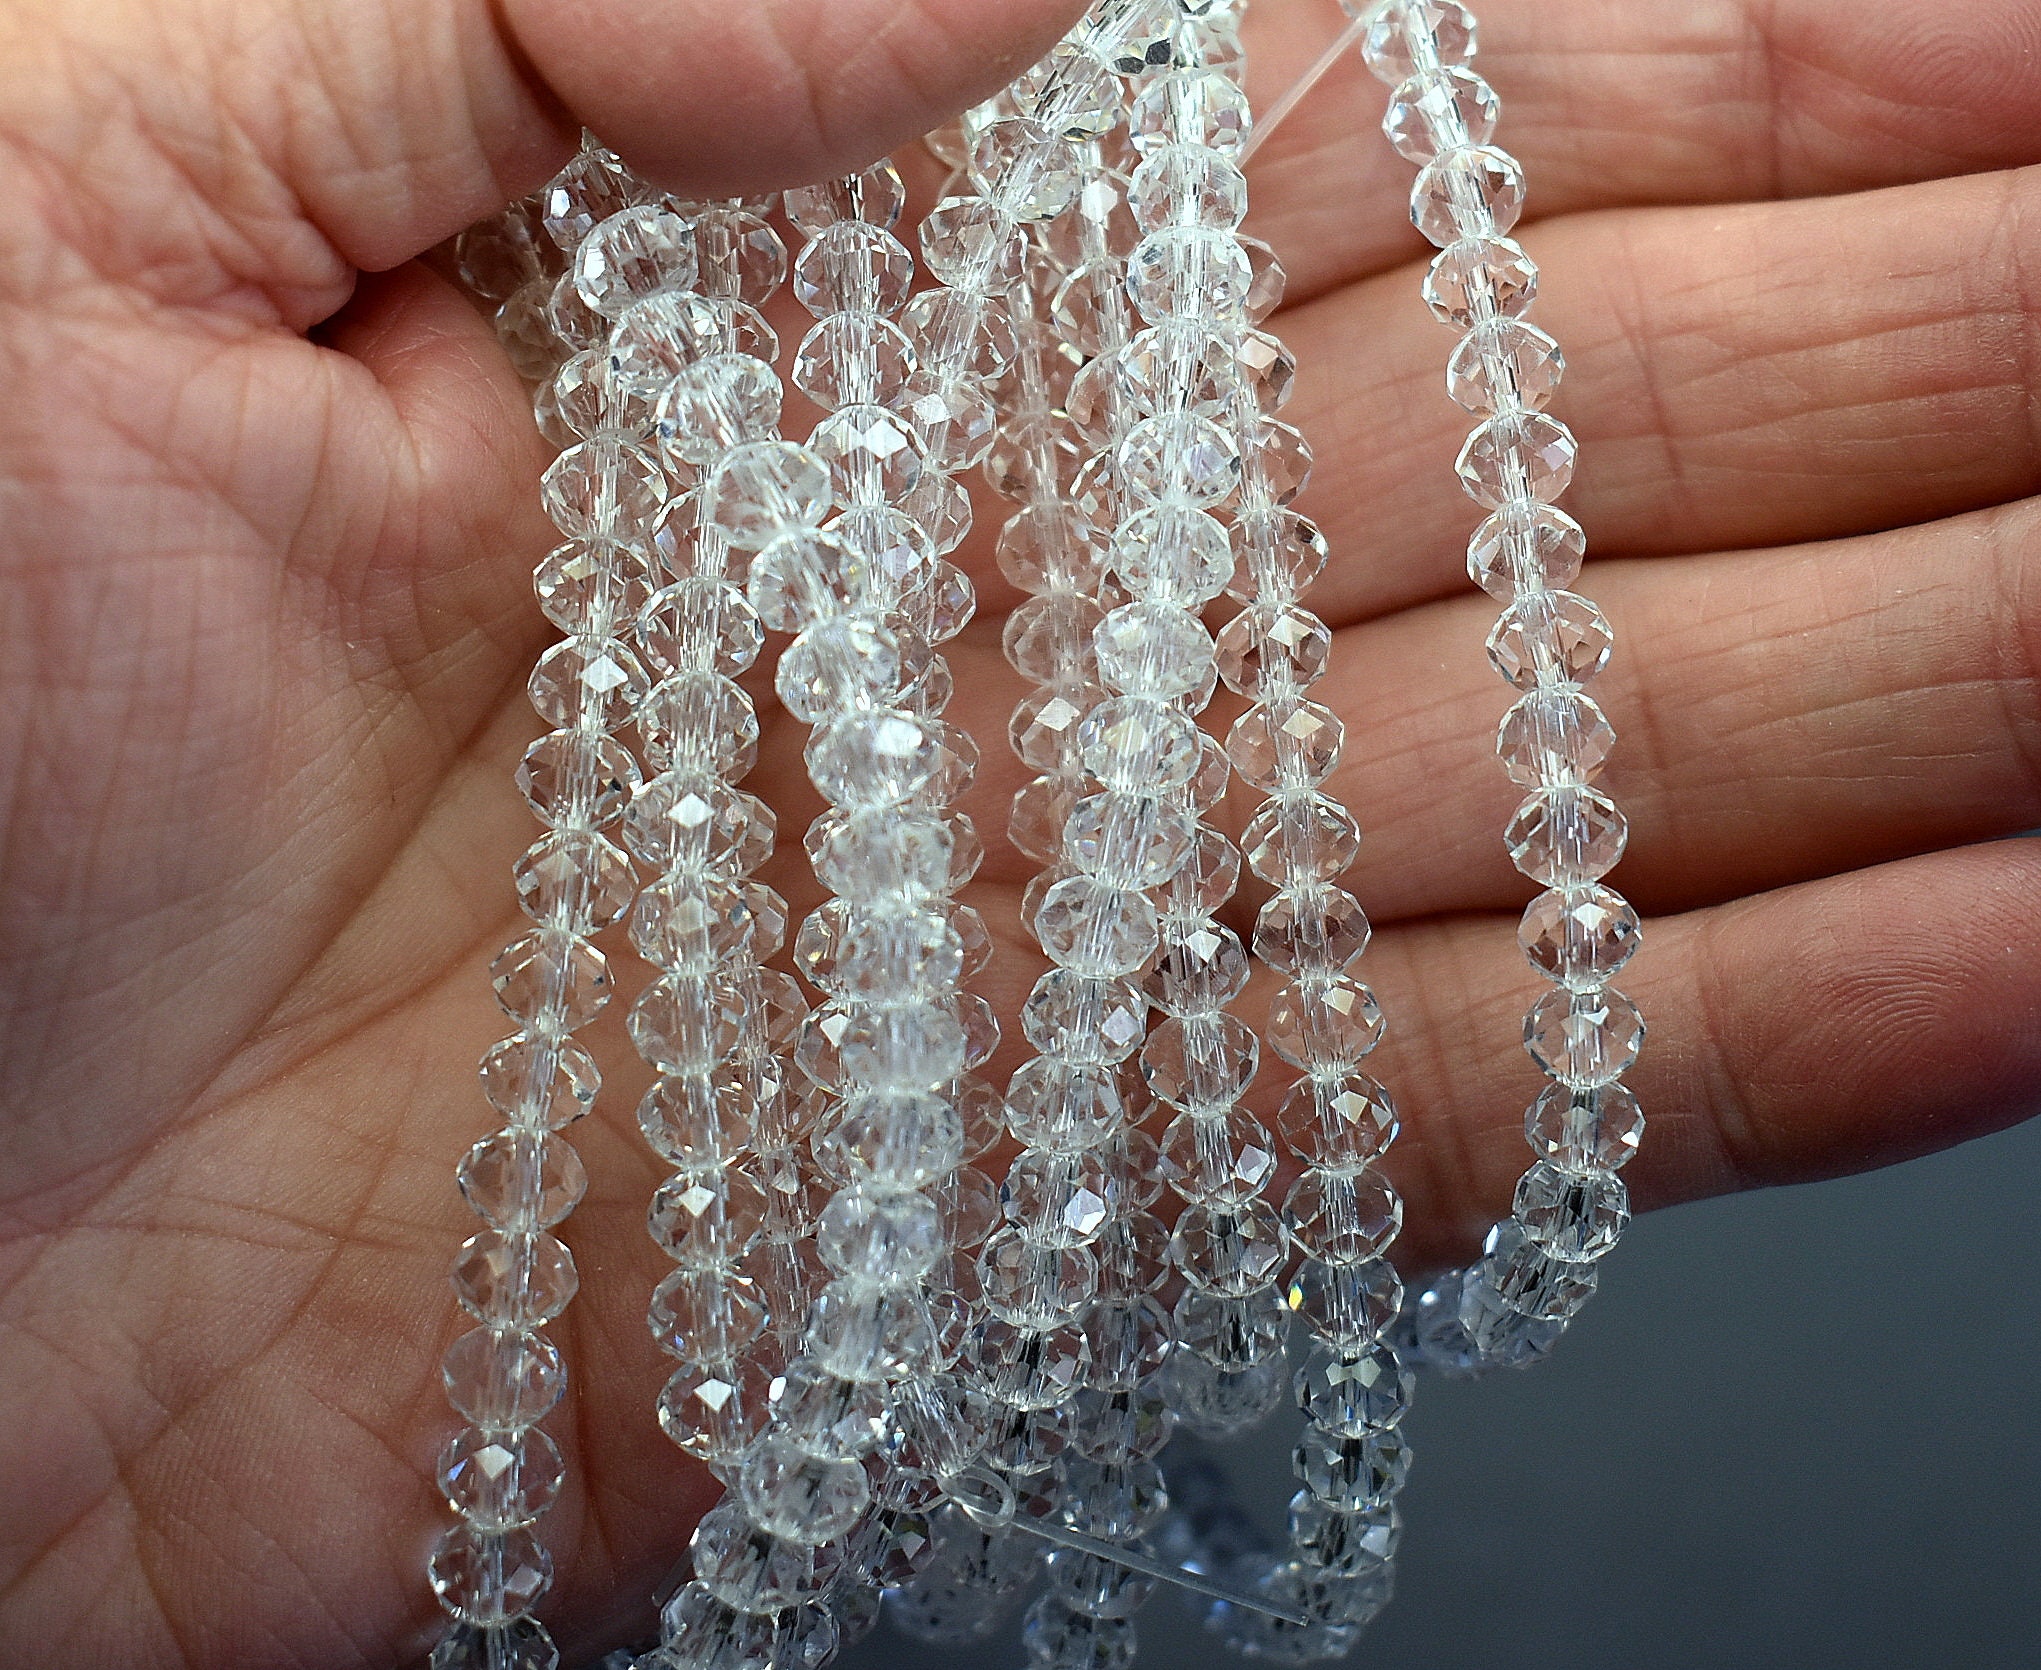 Clear Transparent 20x15mmx6mm Hol6 Rondelle Faceted Beads 80+ Premium PCS.#2269 